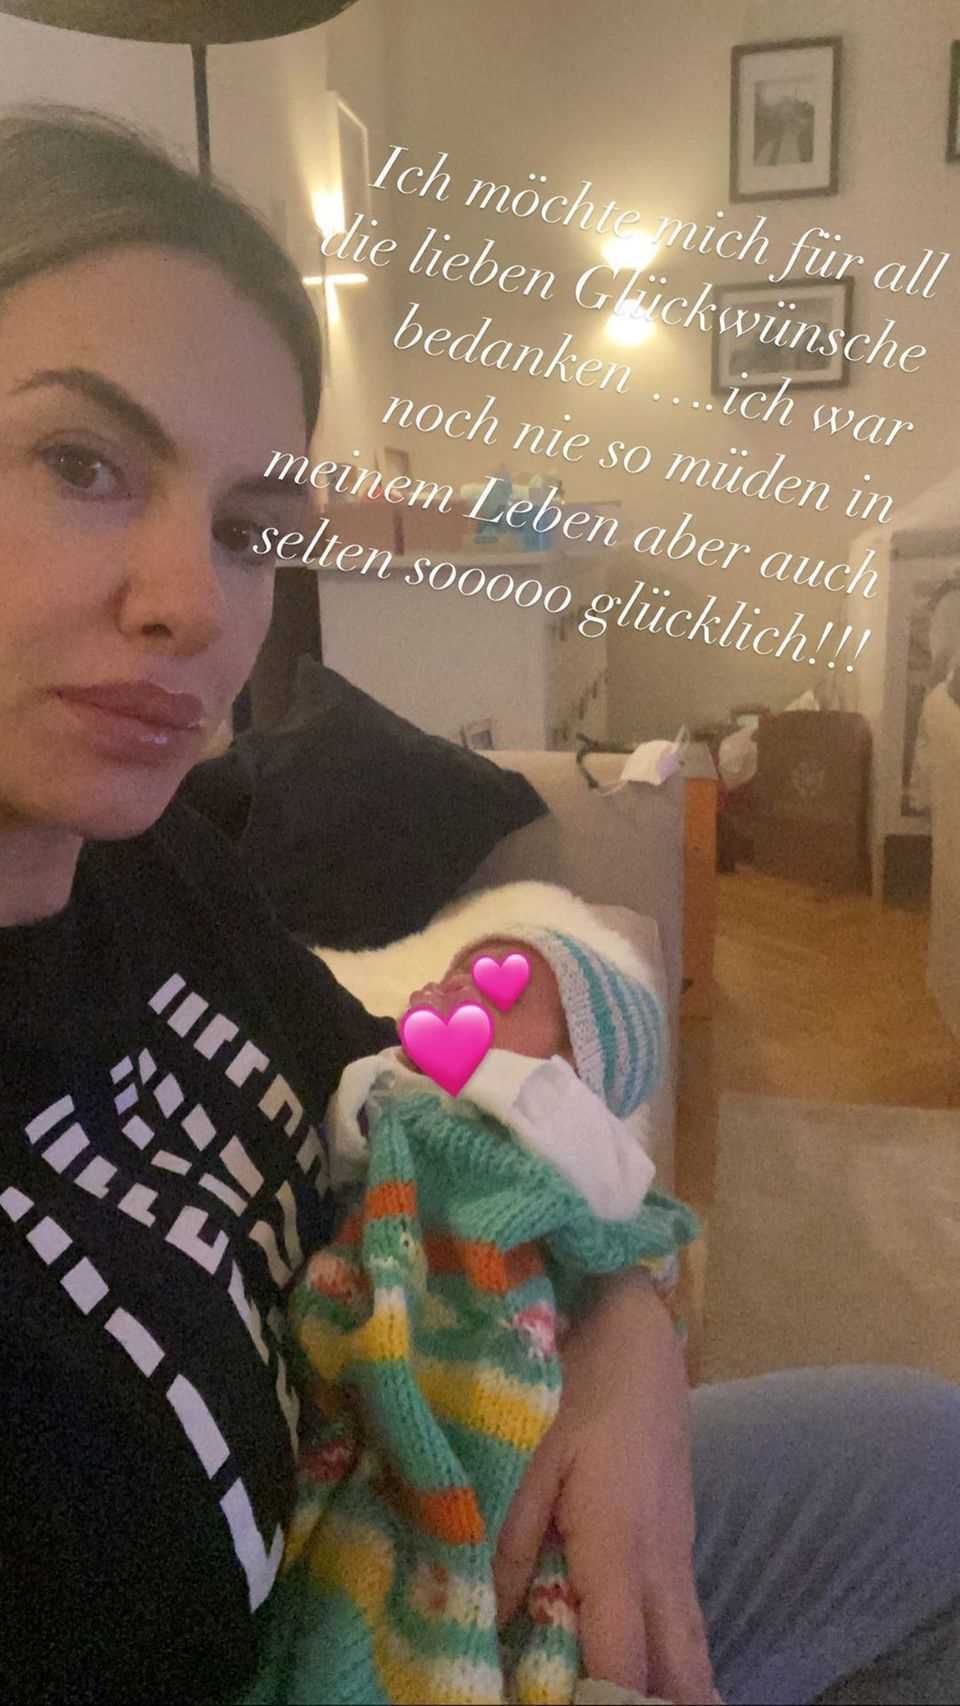 Anna-Maria Ferchichi shows one of her little triplets in her Instagram story.